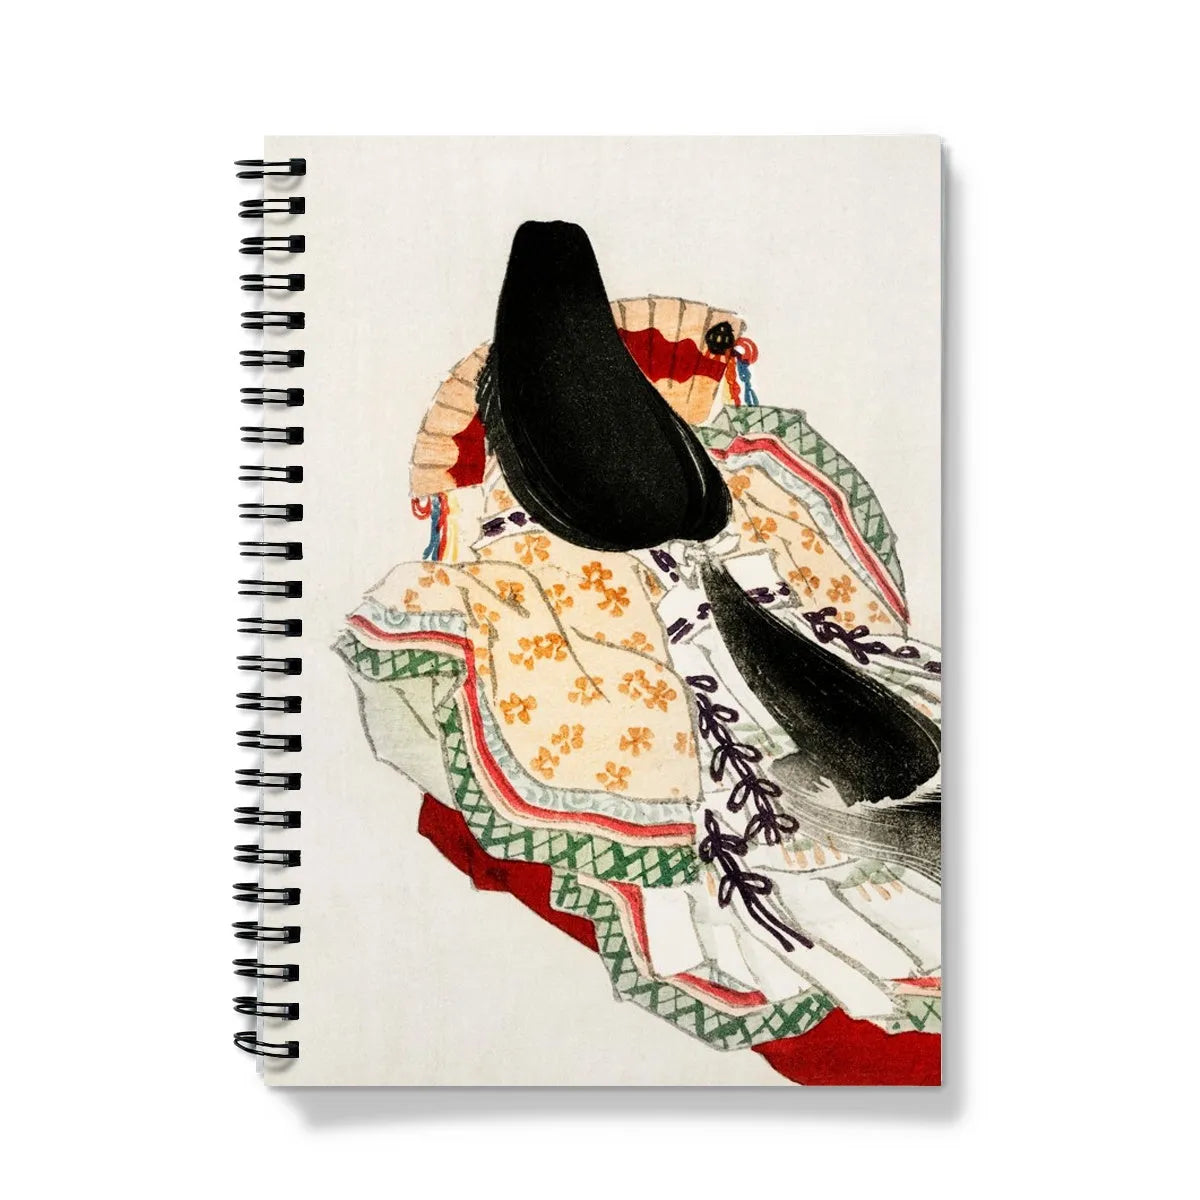 Lady In a Kimono - Kōno Bairei Notebook - A5 / Graph - Notebooks & Notepads - Aesthetic Art